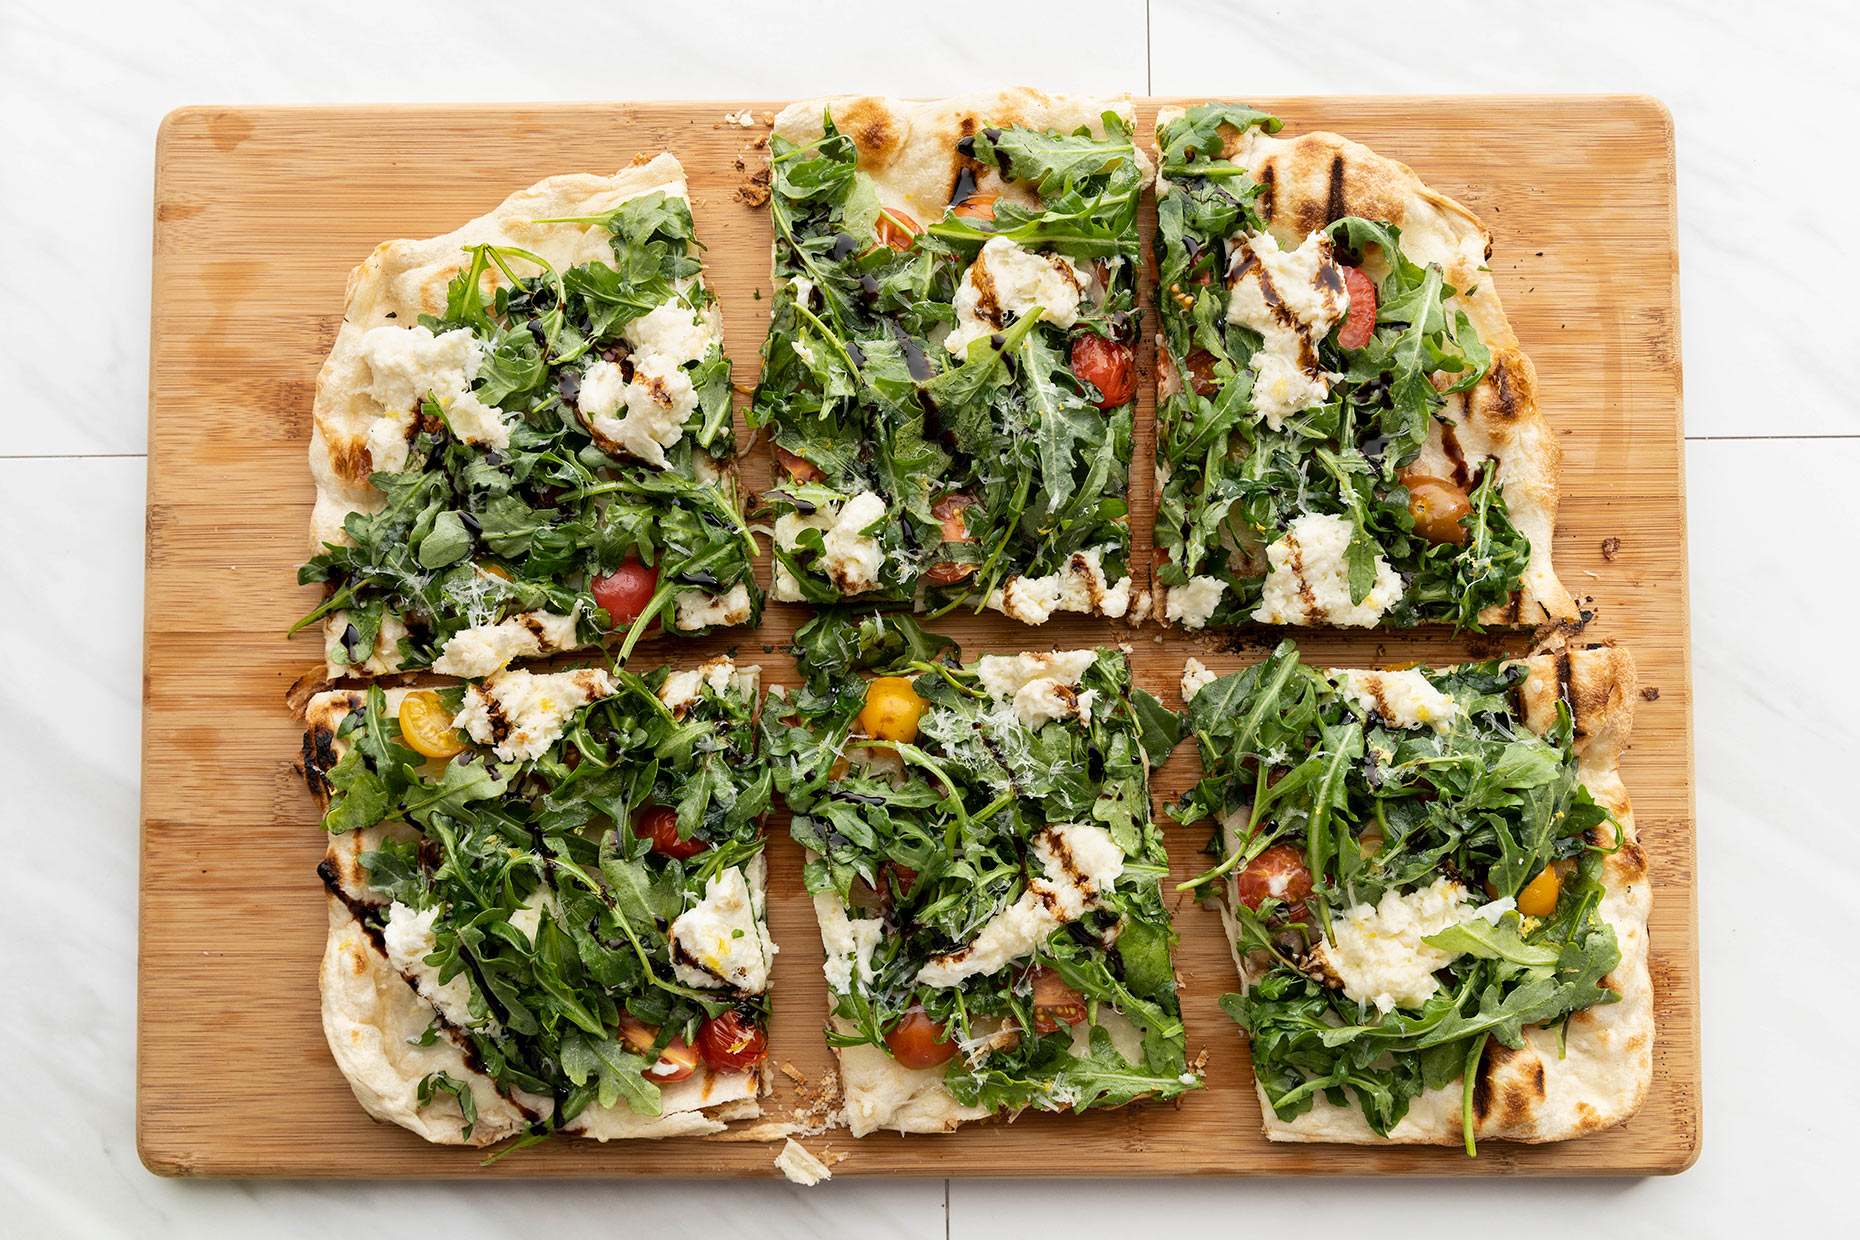 food photographer Chicago - a grilled salad pizza created by Leo Pizzirri